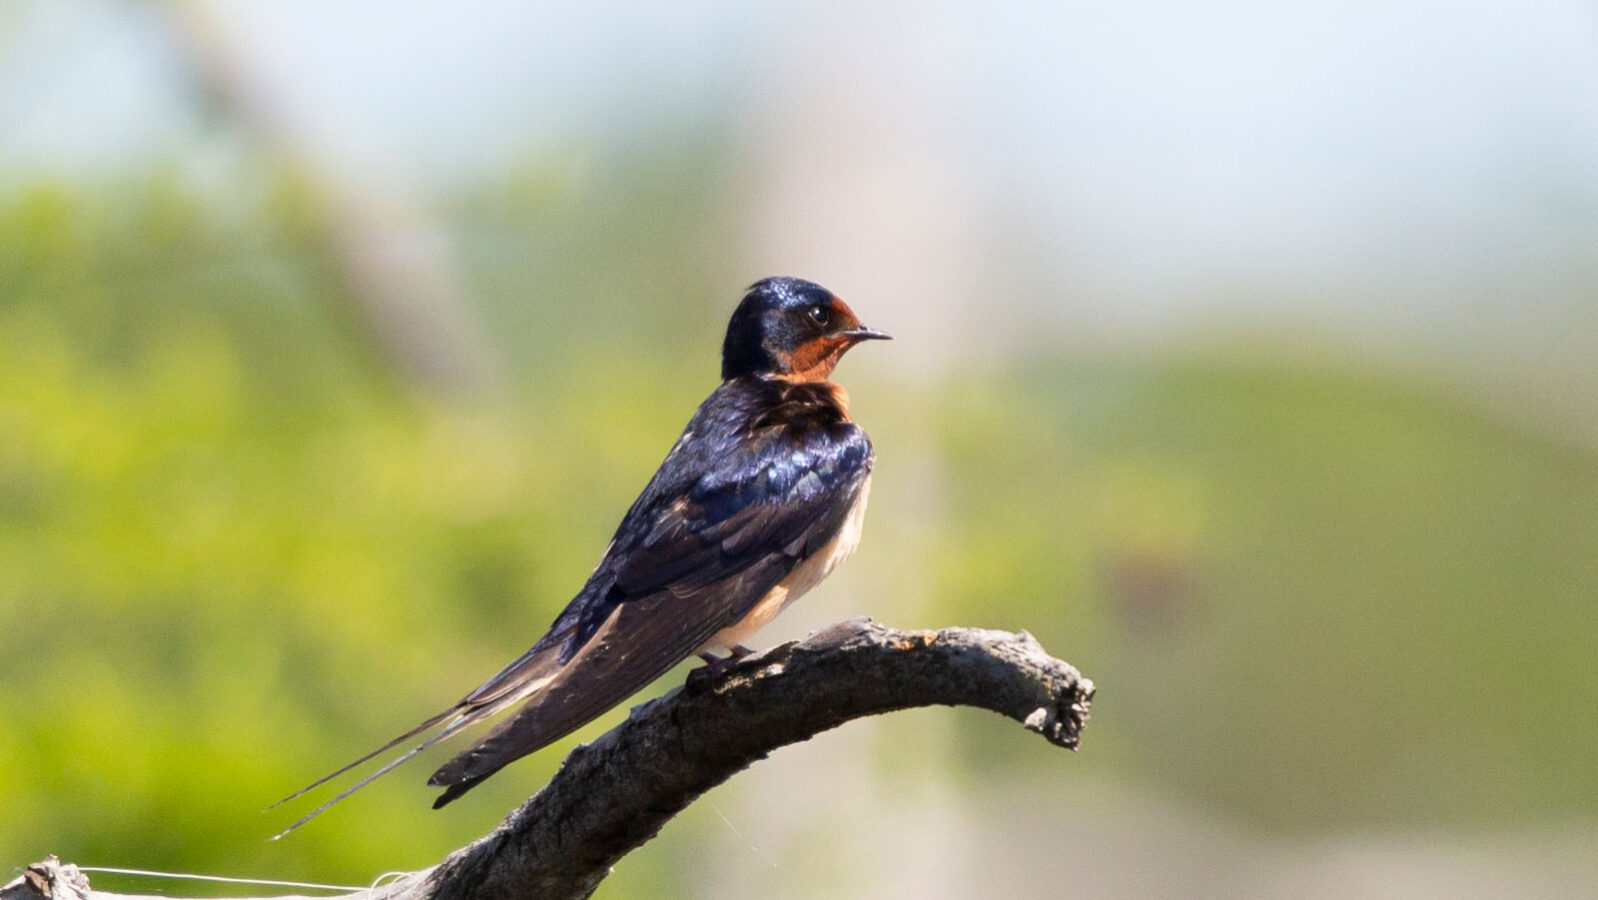 Adult barn swallow looking out majestically from a tree branch